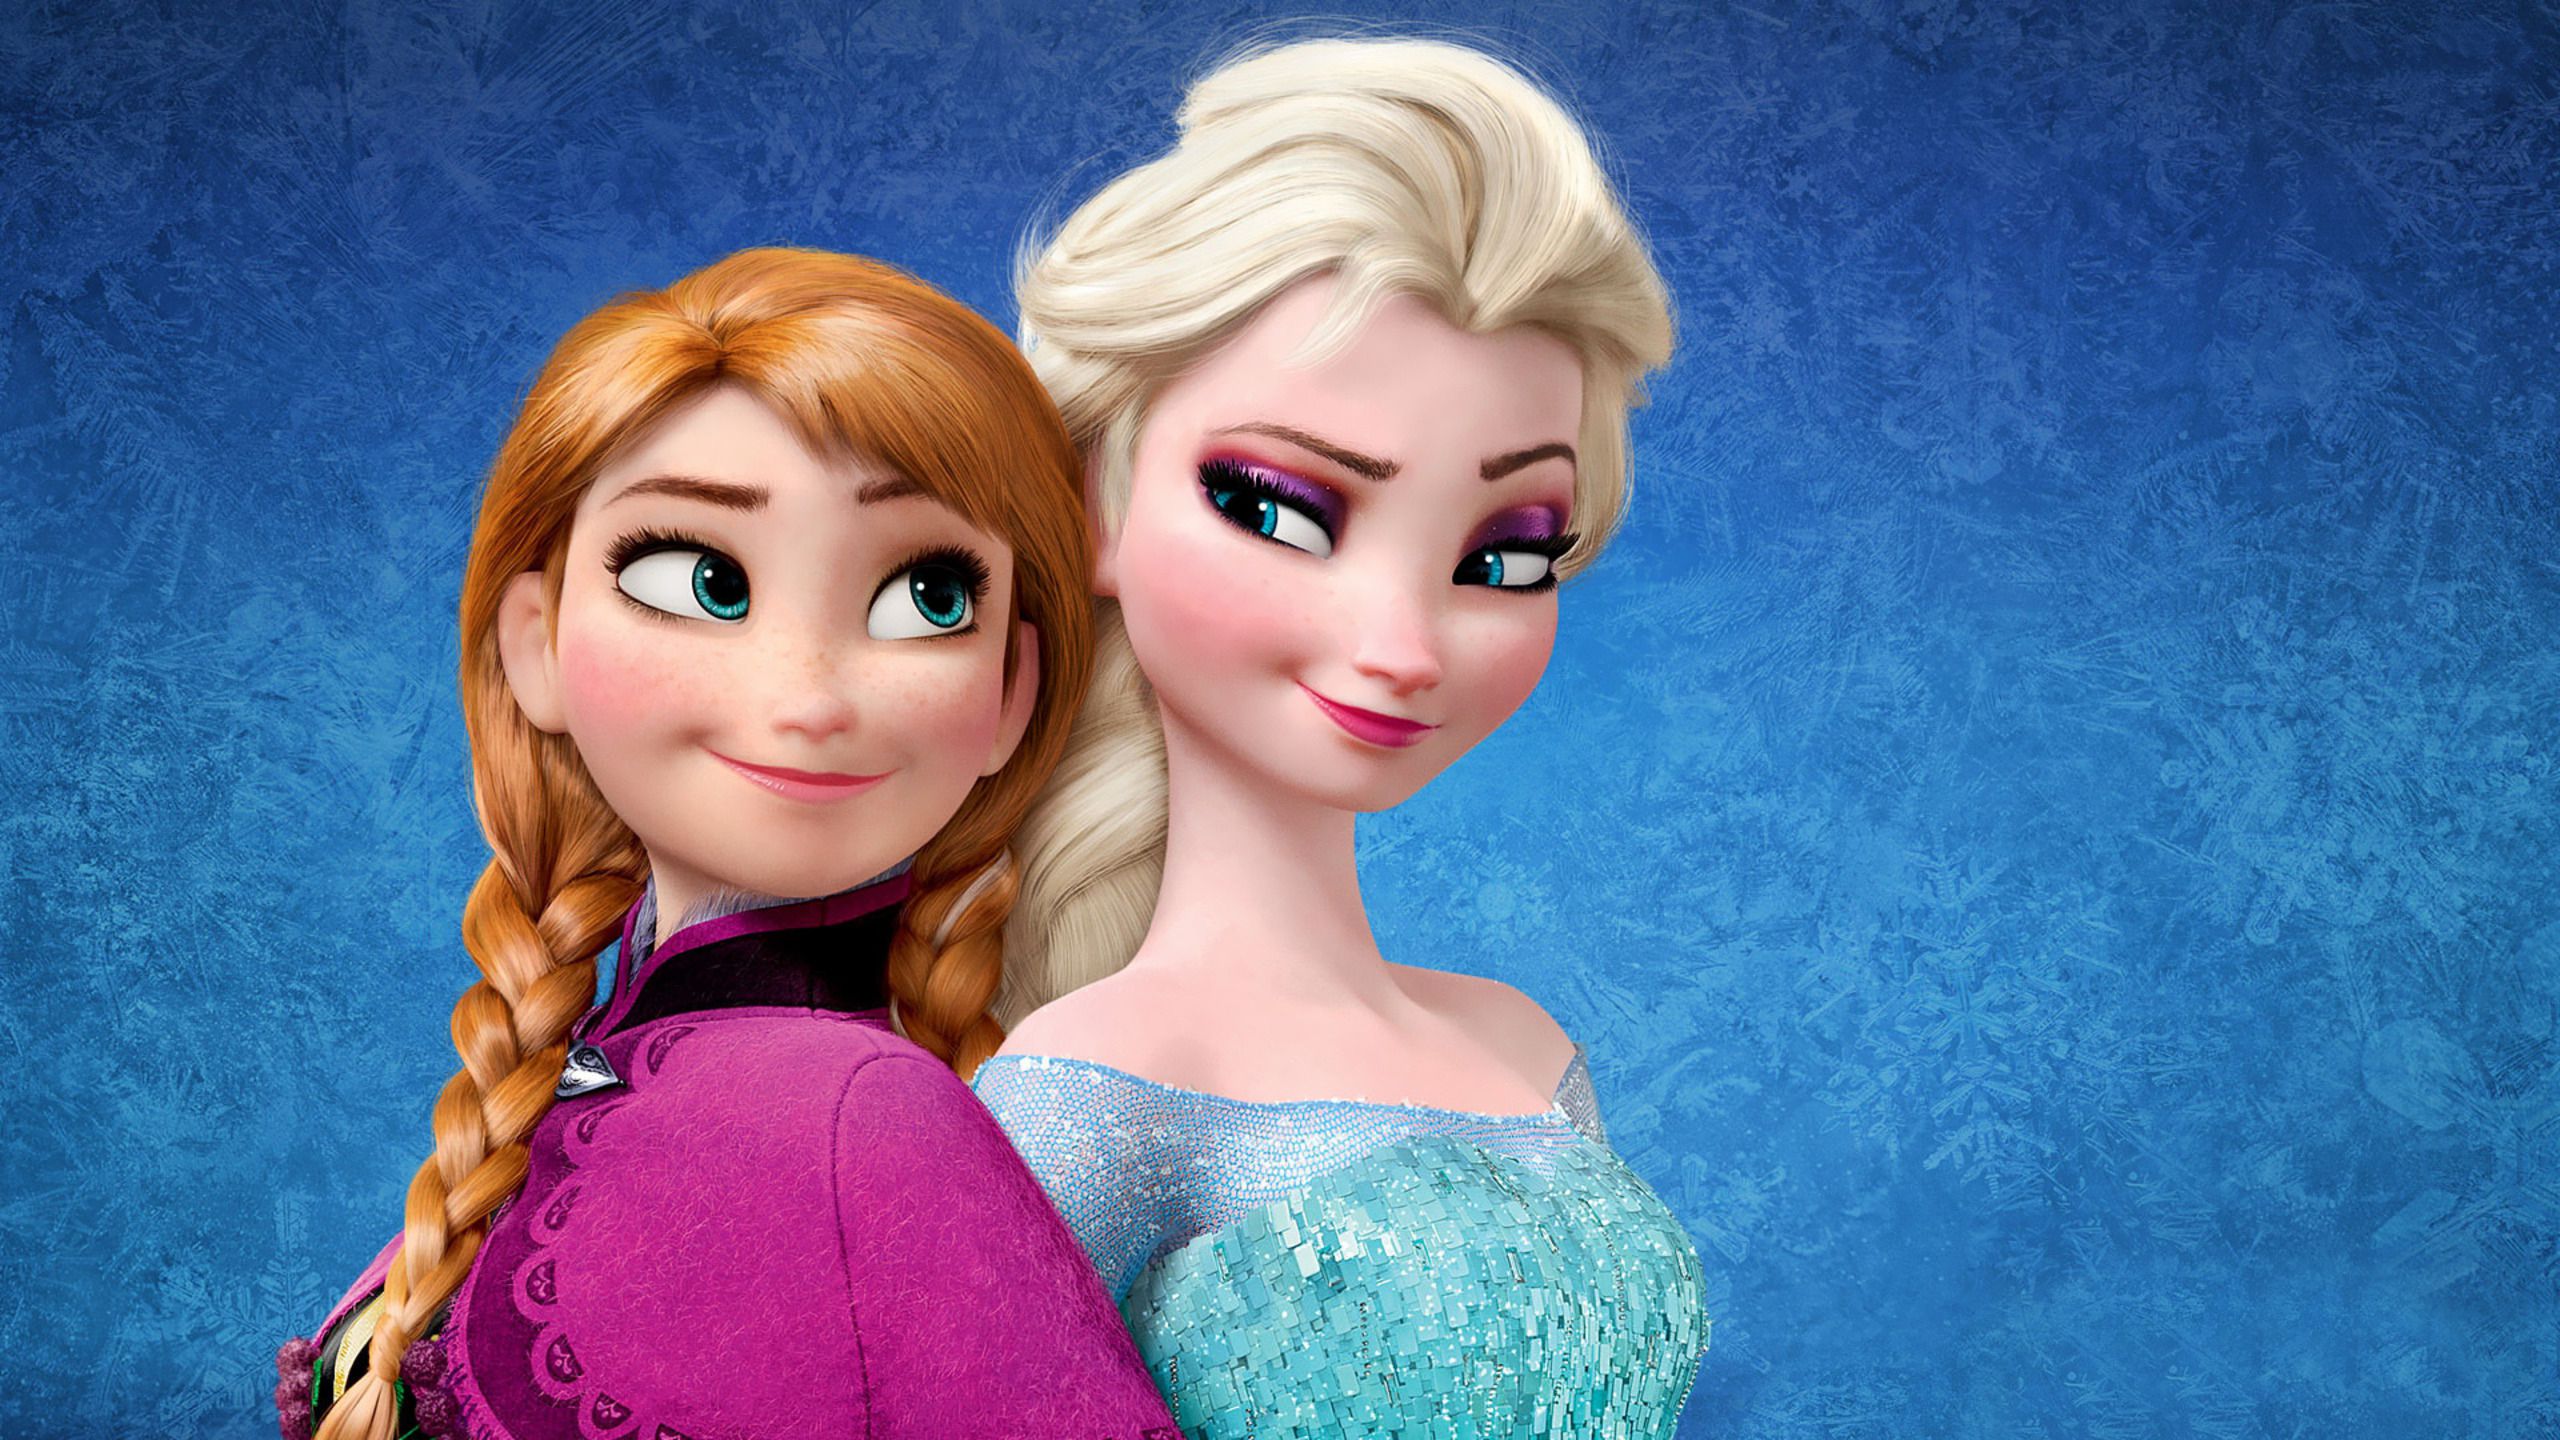 Unofficial Image From ‘Frozen 2’ Surfaces